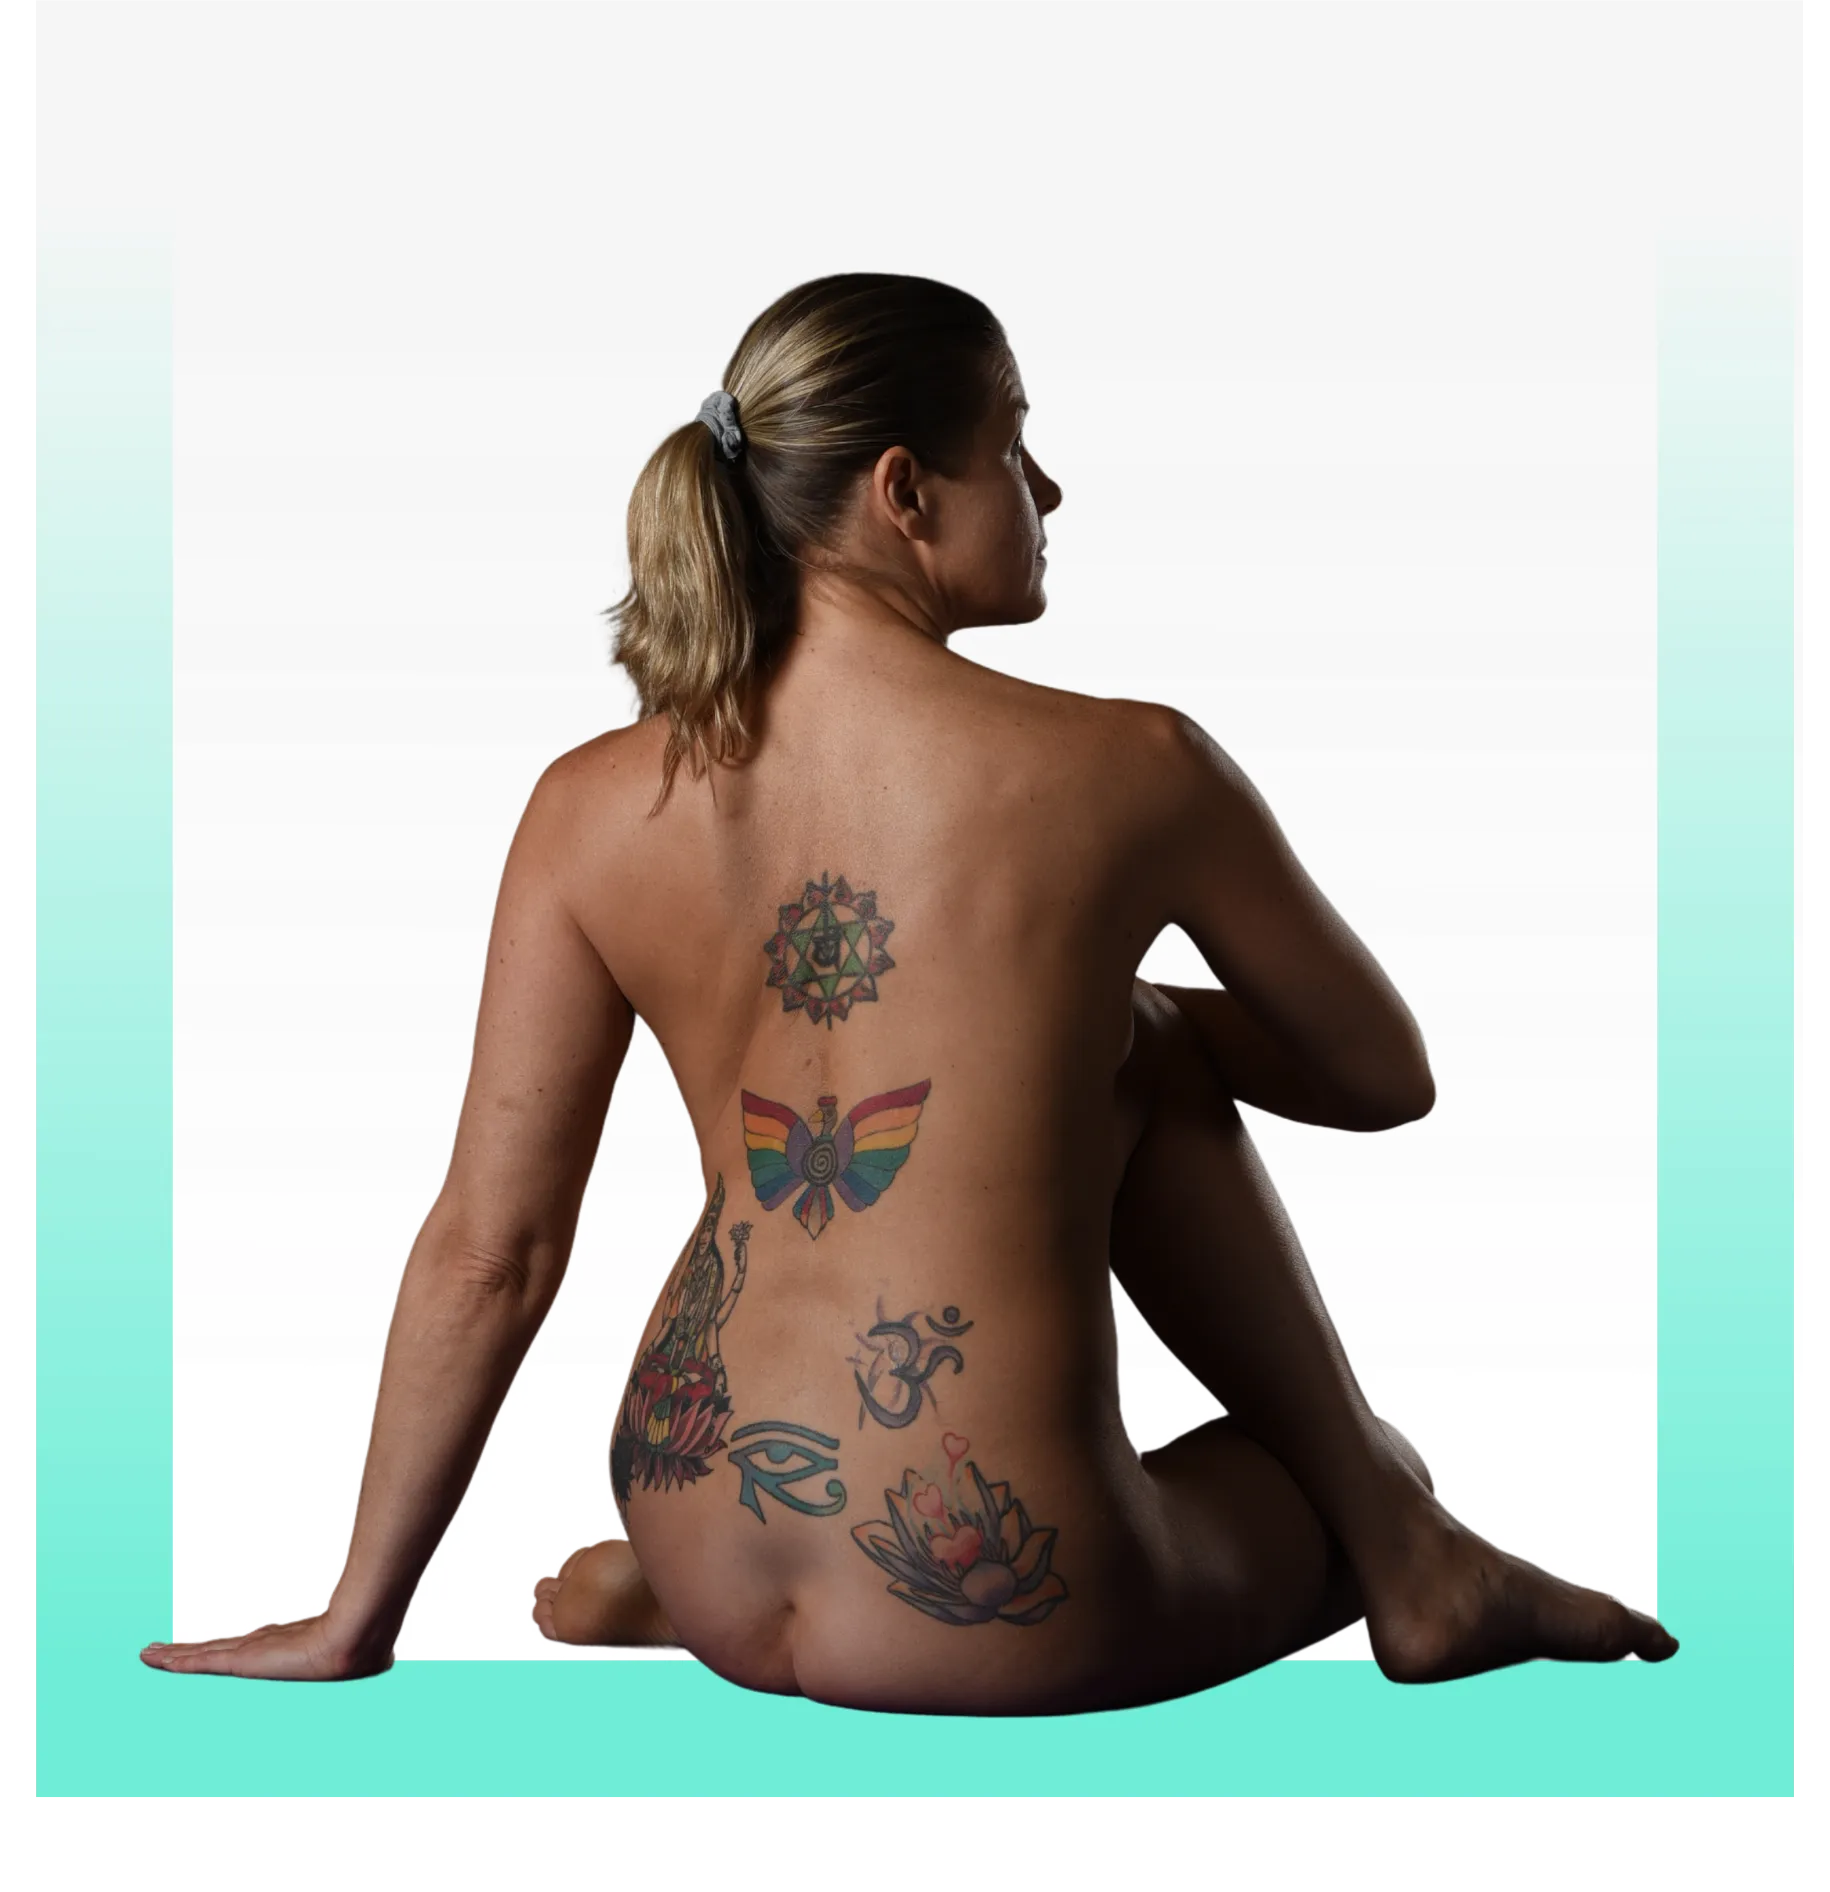 woman with tatoos her back toward viewer in a yoga pose